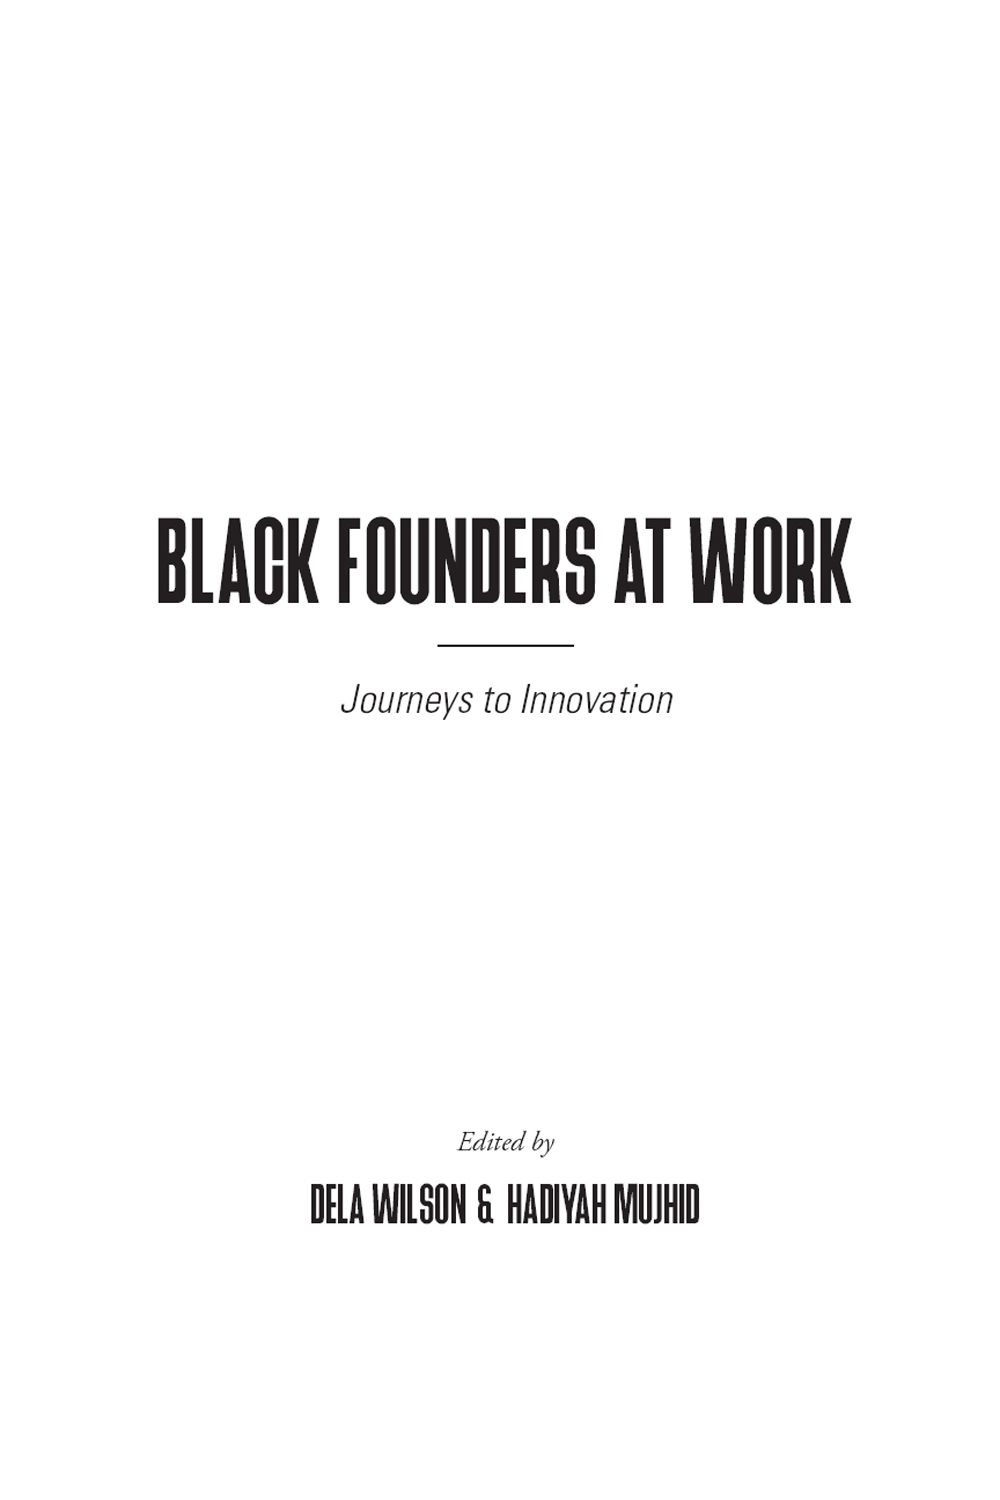 HBCUvc Black Founders at Work Journeys to Innovation 2021 by HBCUvc - photo 2